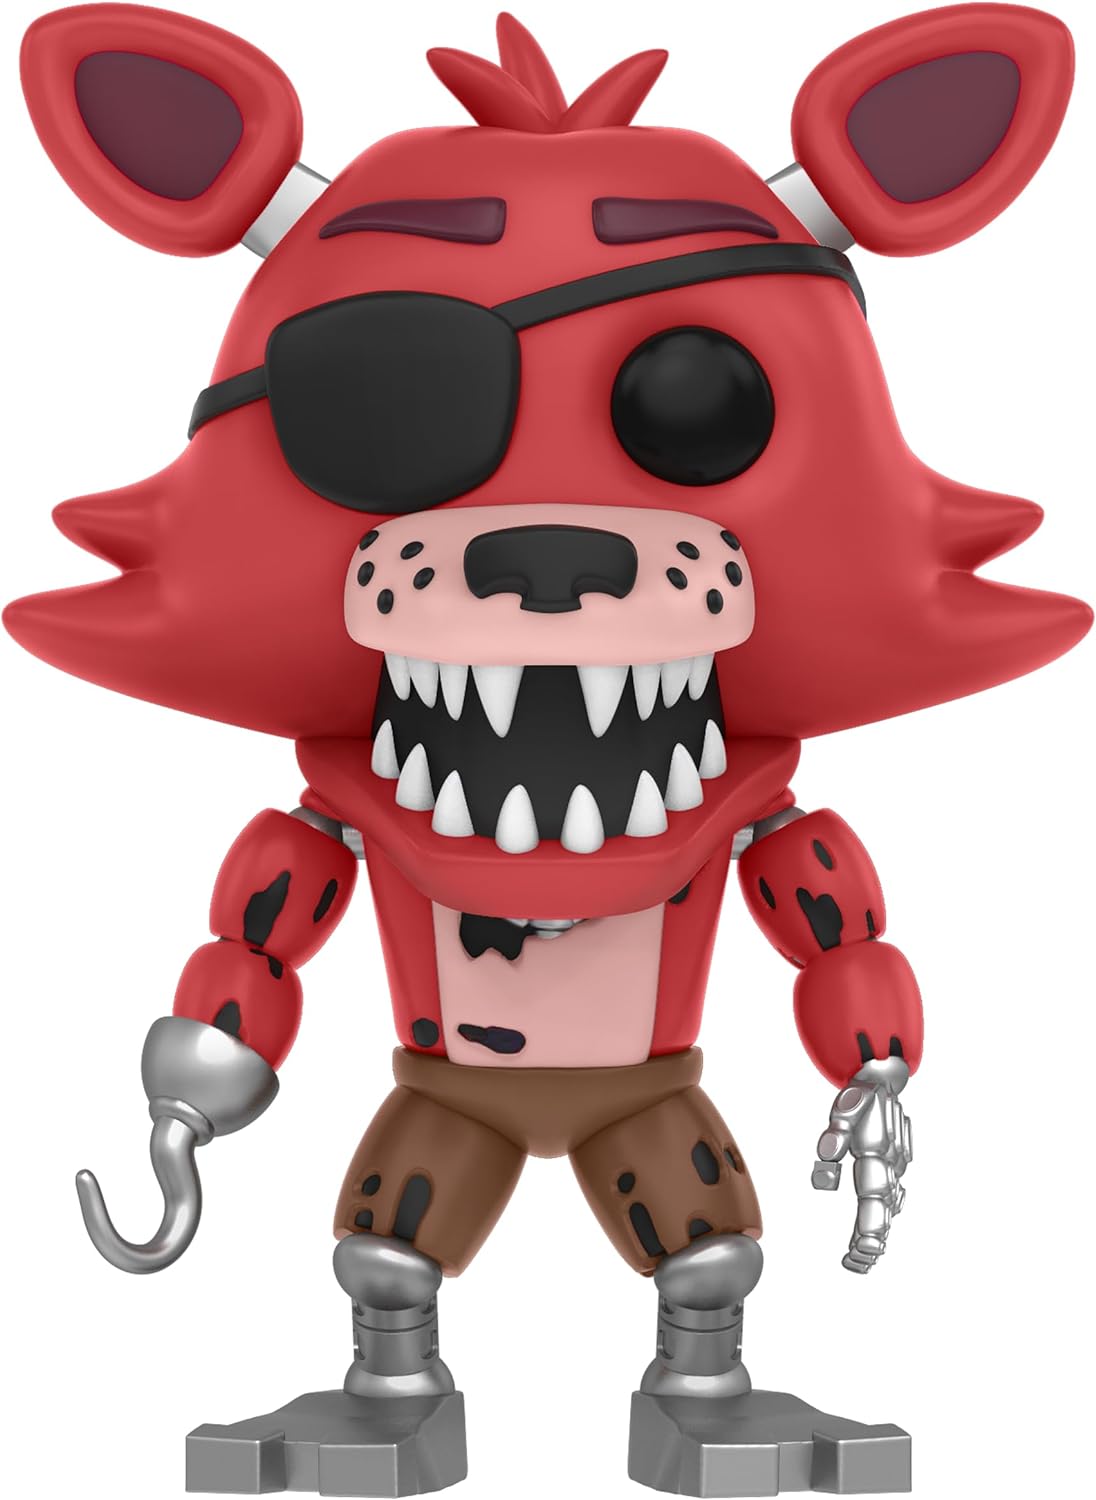 Funko Pop! Games: Five Nights At Freddy's (FNAF) Foxy the Pirate